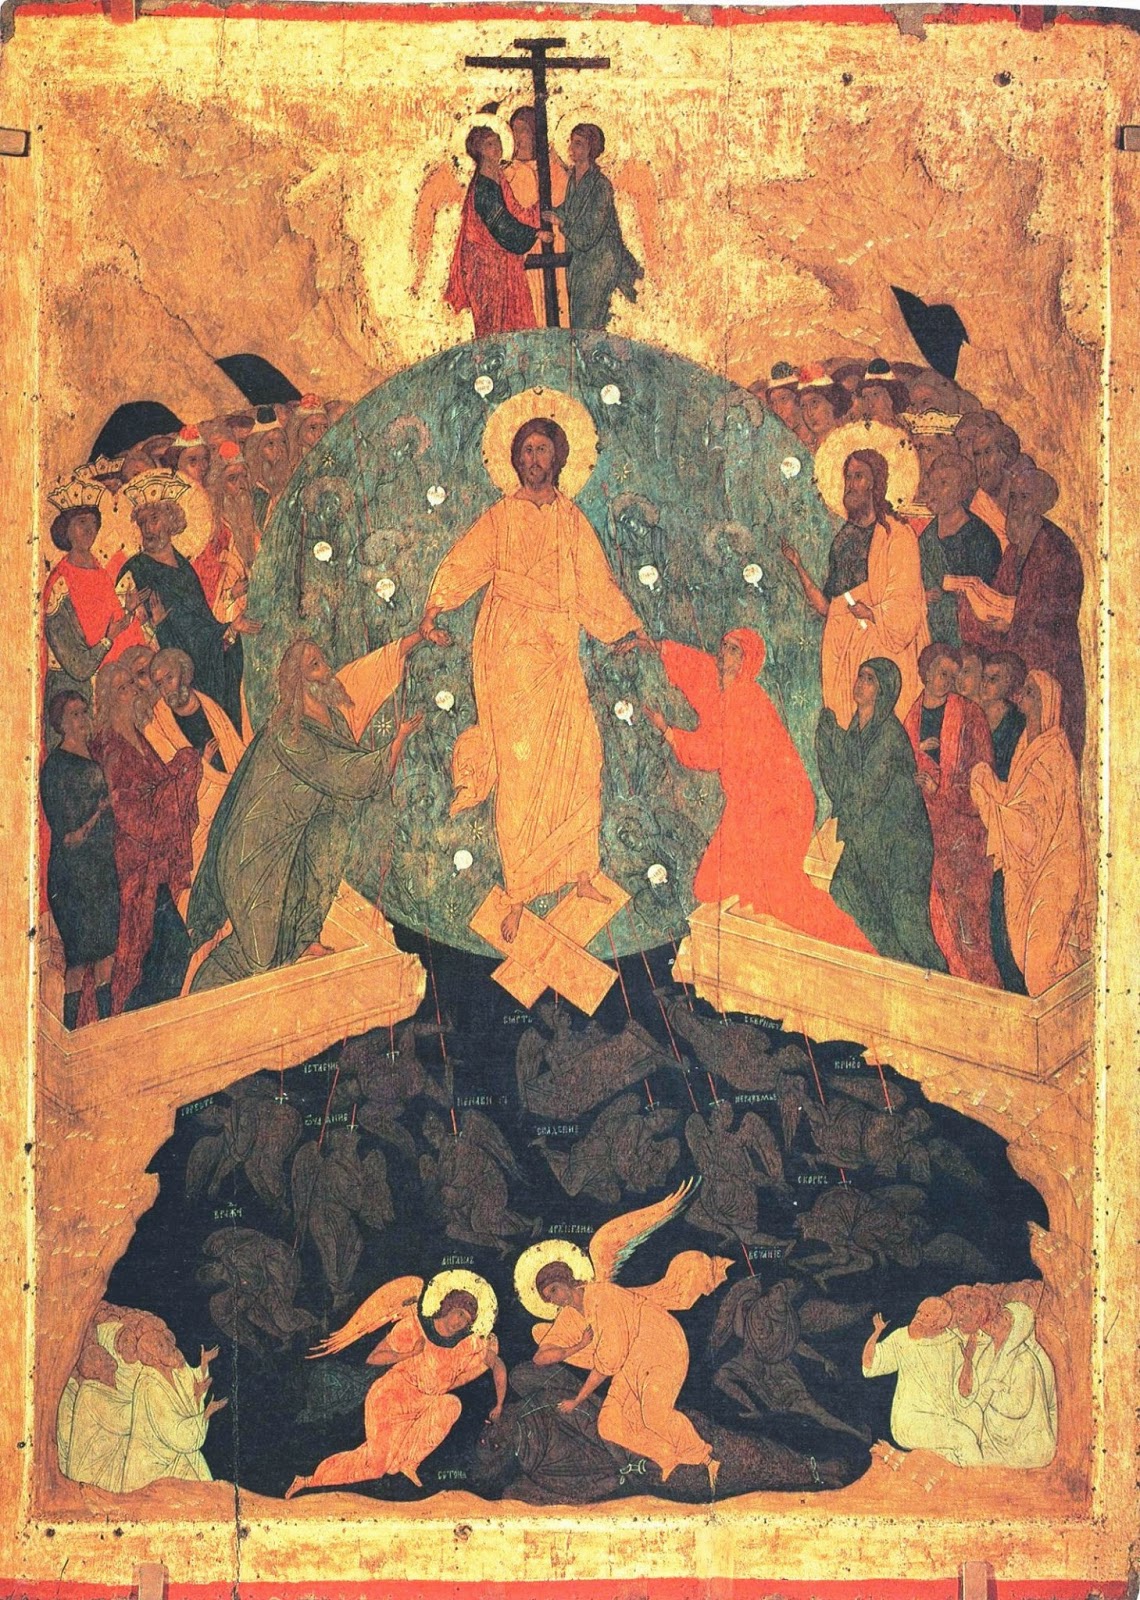 "Descent into Hell by Dionisius and workshop (Ferapontov monastery)" by Moscow school, Dionysius and his workshop - File:Descent into hell-Russian Museum.jpg. Licensed under Public Domain via Wikimedia Commons - http://commons.wikimedia.org/wiki/File:Descent_into_Hell_by_Dionisius_and_workshop_(Ferapontov_monastery).jpg#/media/File:Descent_into_Hell_by_Dionisius_and_workshop_(Ferapontov_monastery).jpg